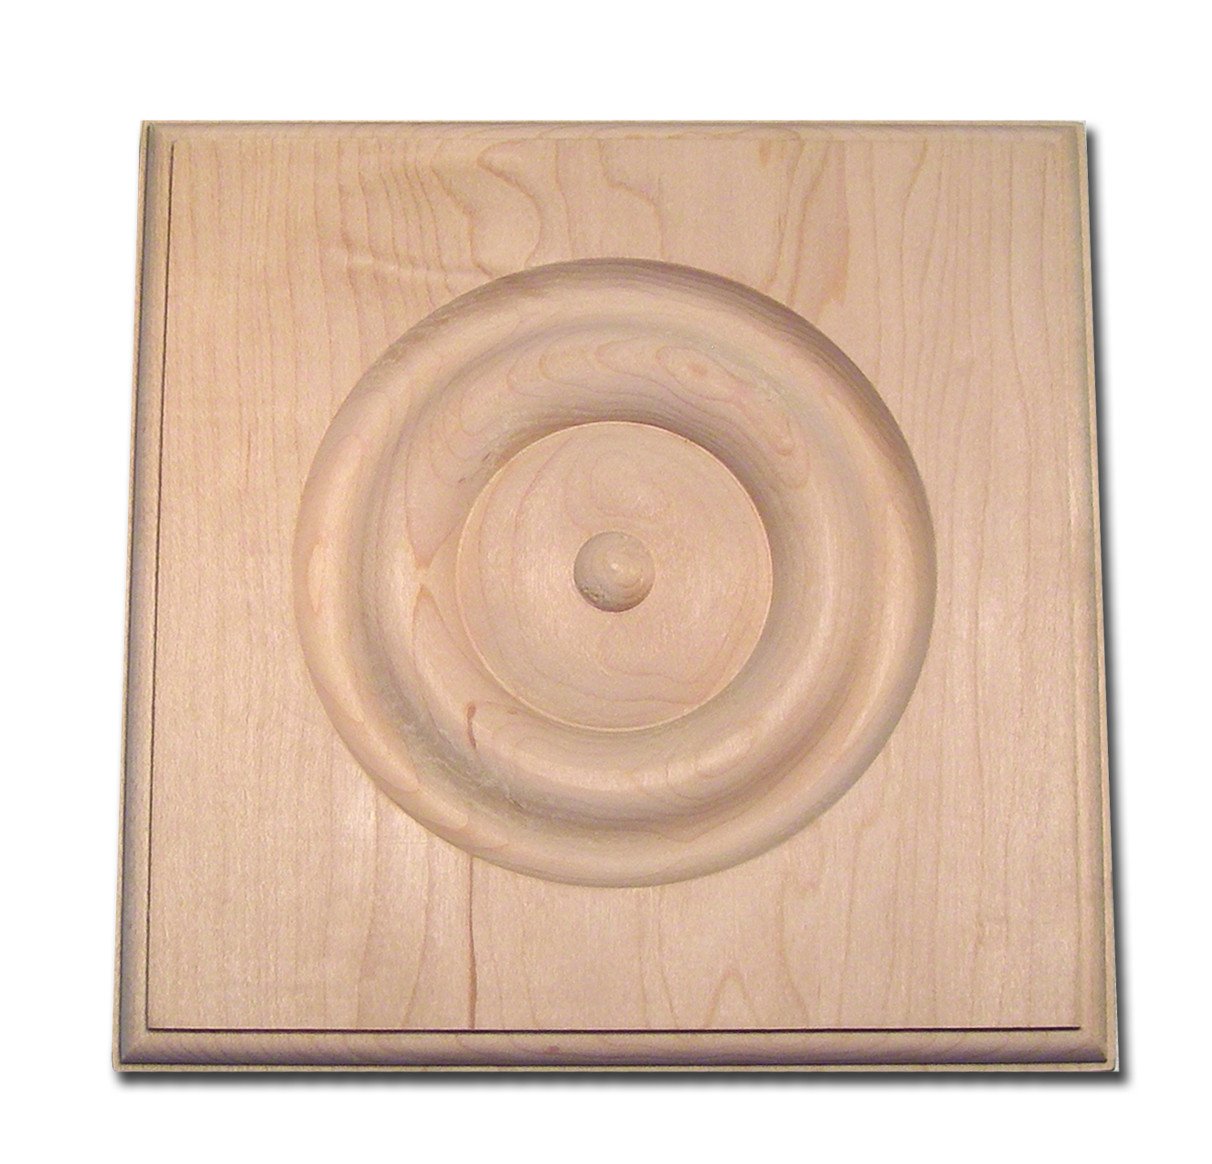 Castlewood W-R-6 Traditional Rosette